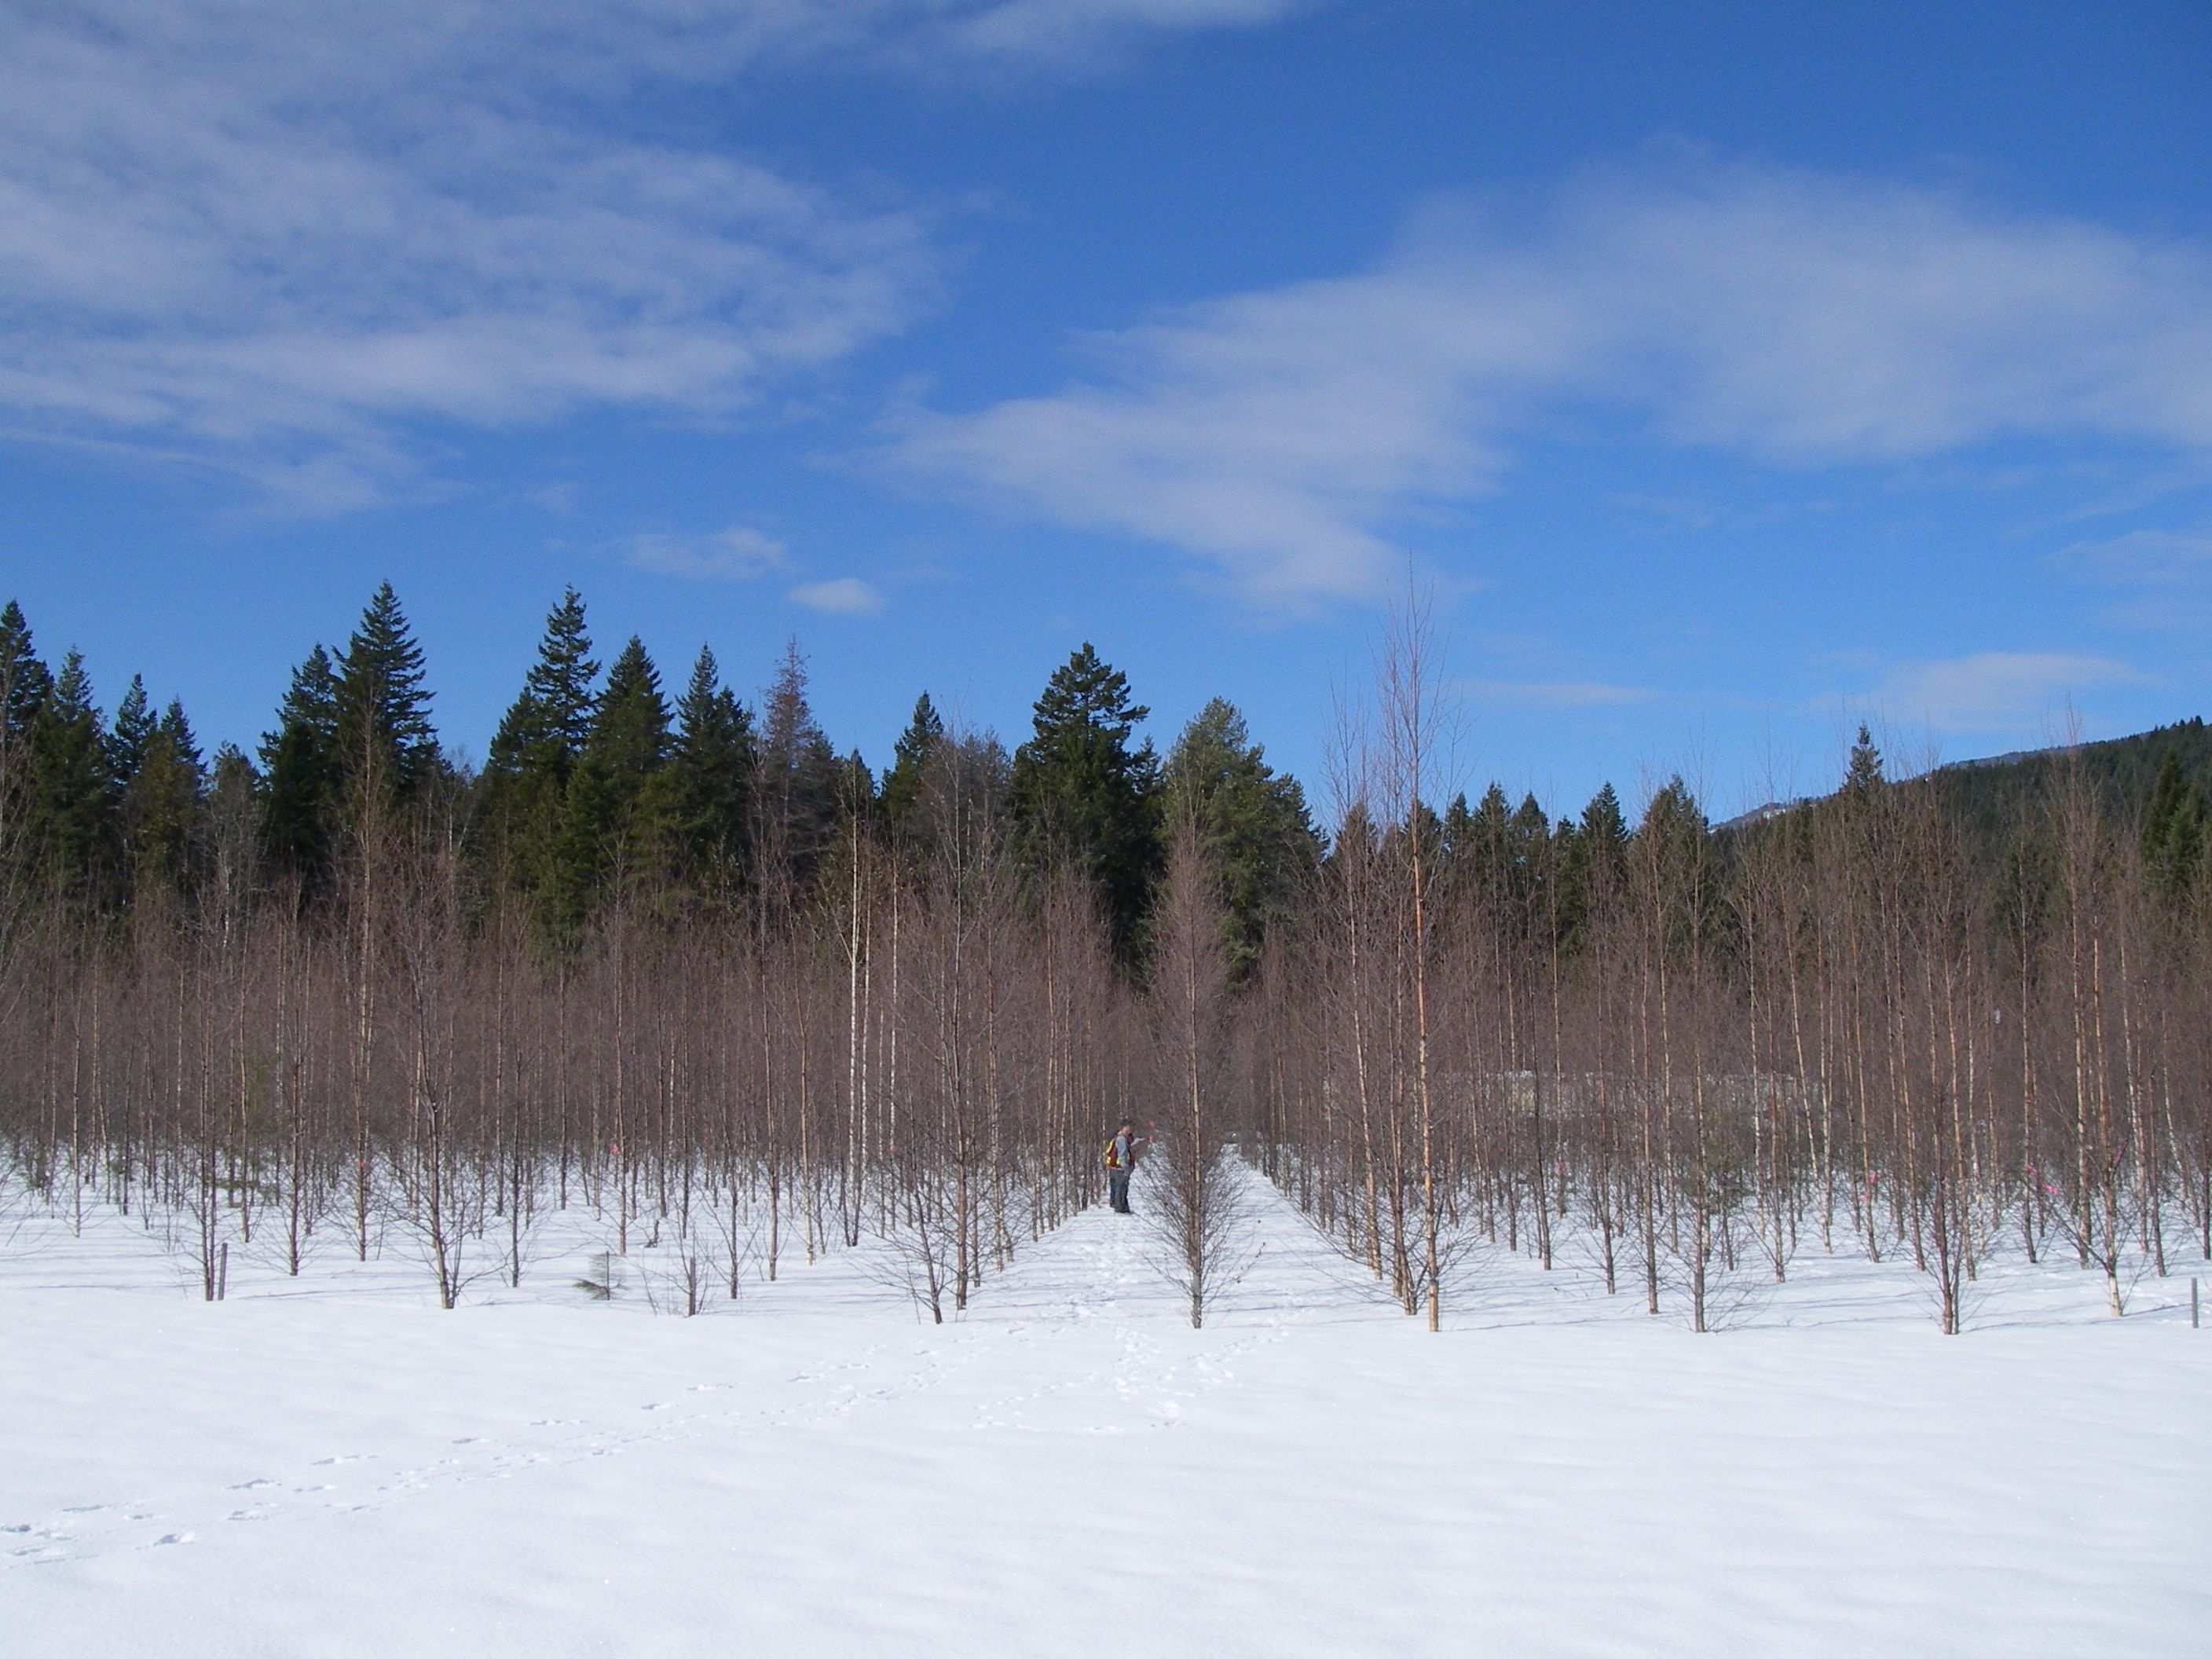 A snowy field lined with straight rows of young leafless trees.